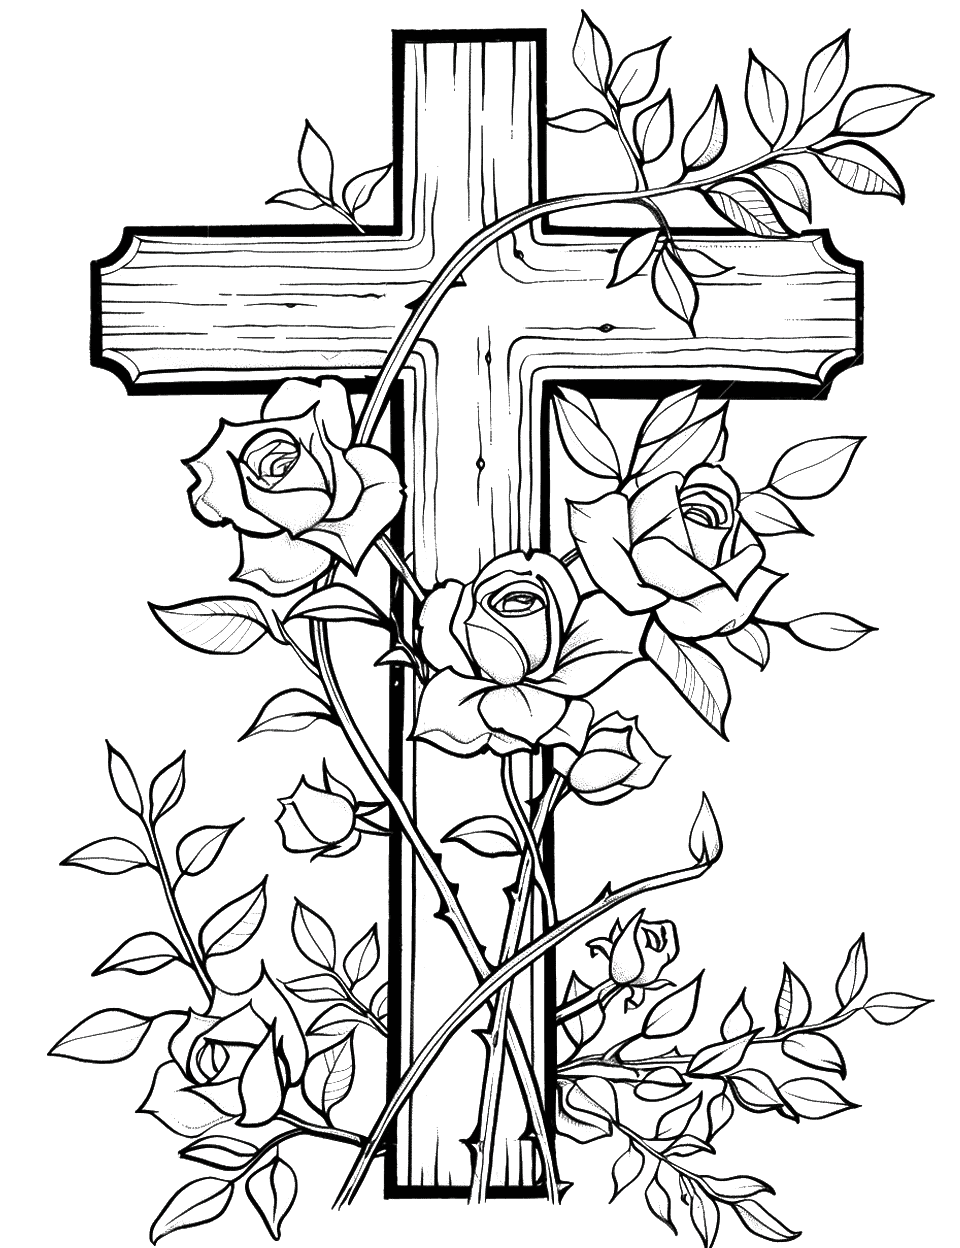 Cross with Climbing Roses Coloring Page - A wooden cross with climbing roses twining around it.